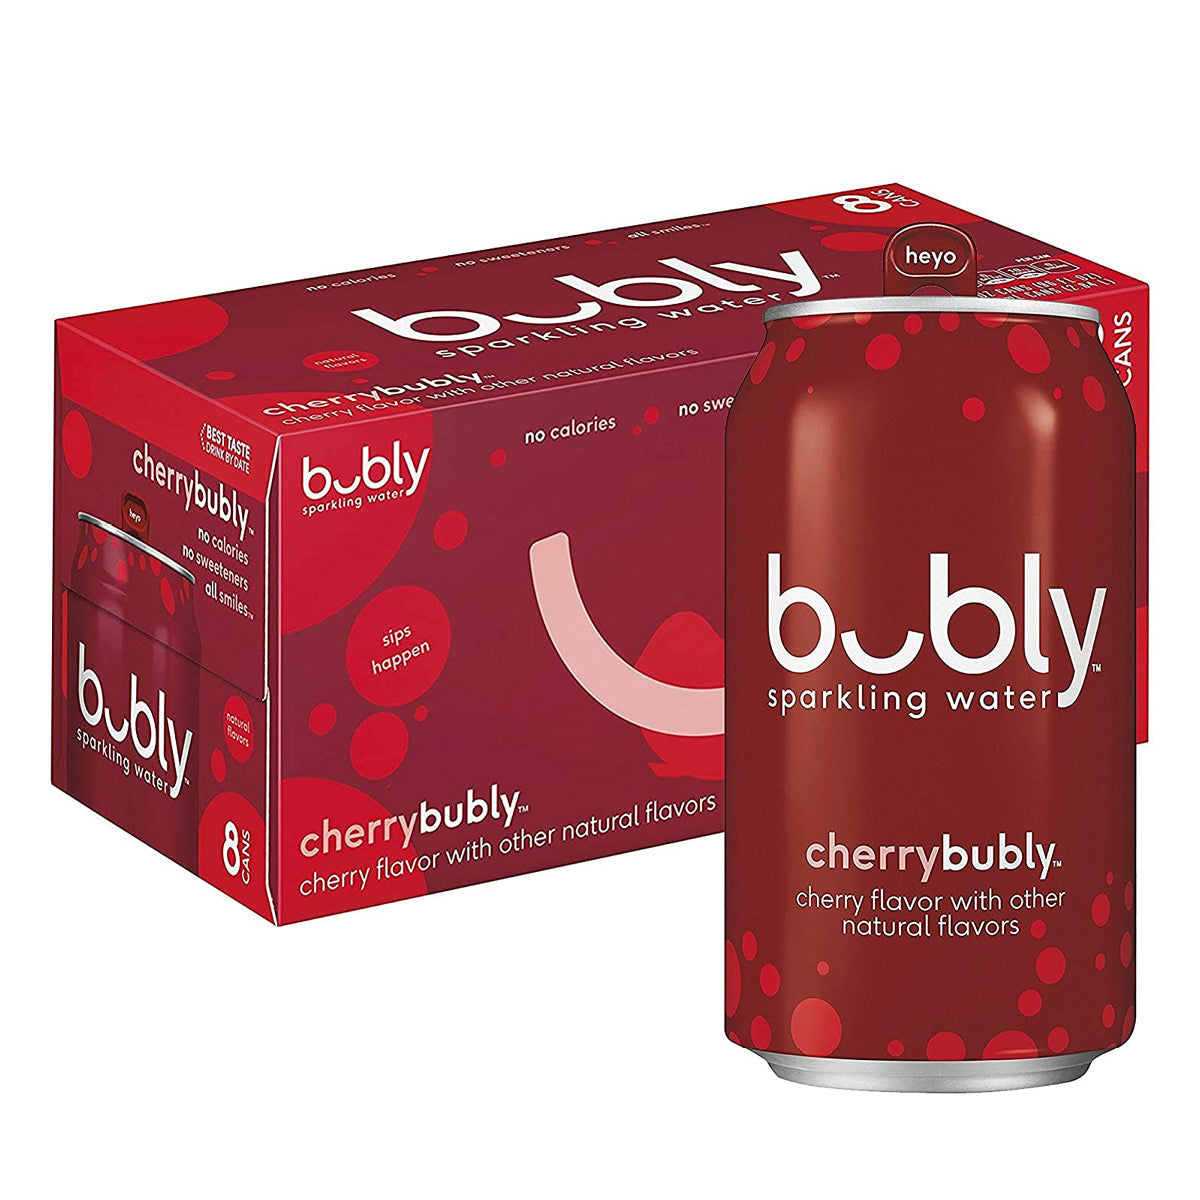 Bubly Cherry Sparkling Water Beverage, 12 pk